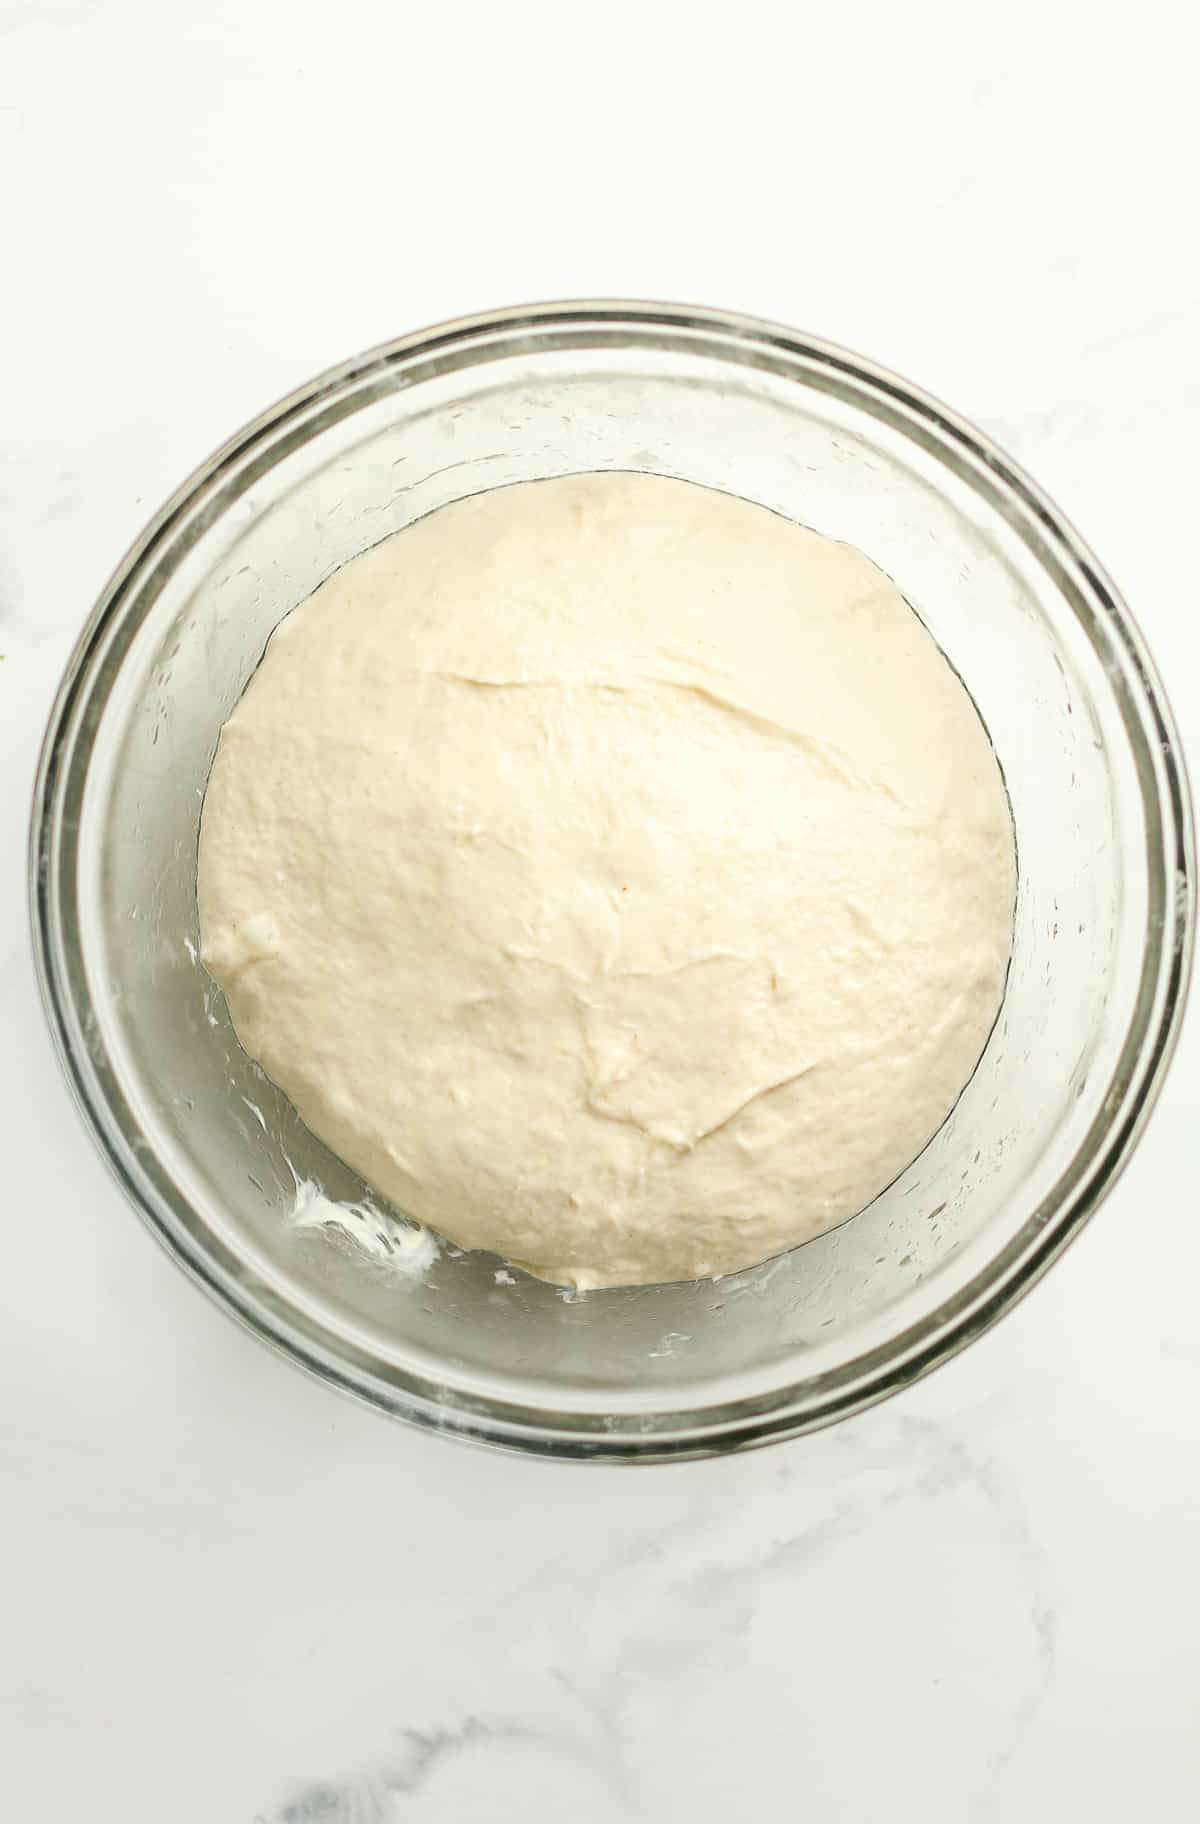 A bowl of the bread dough after mixing.